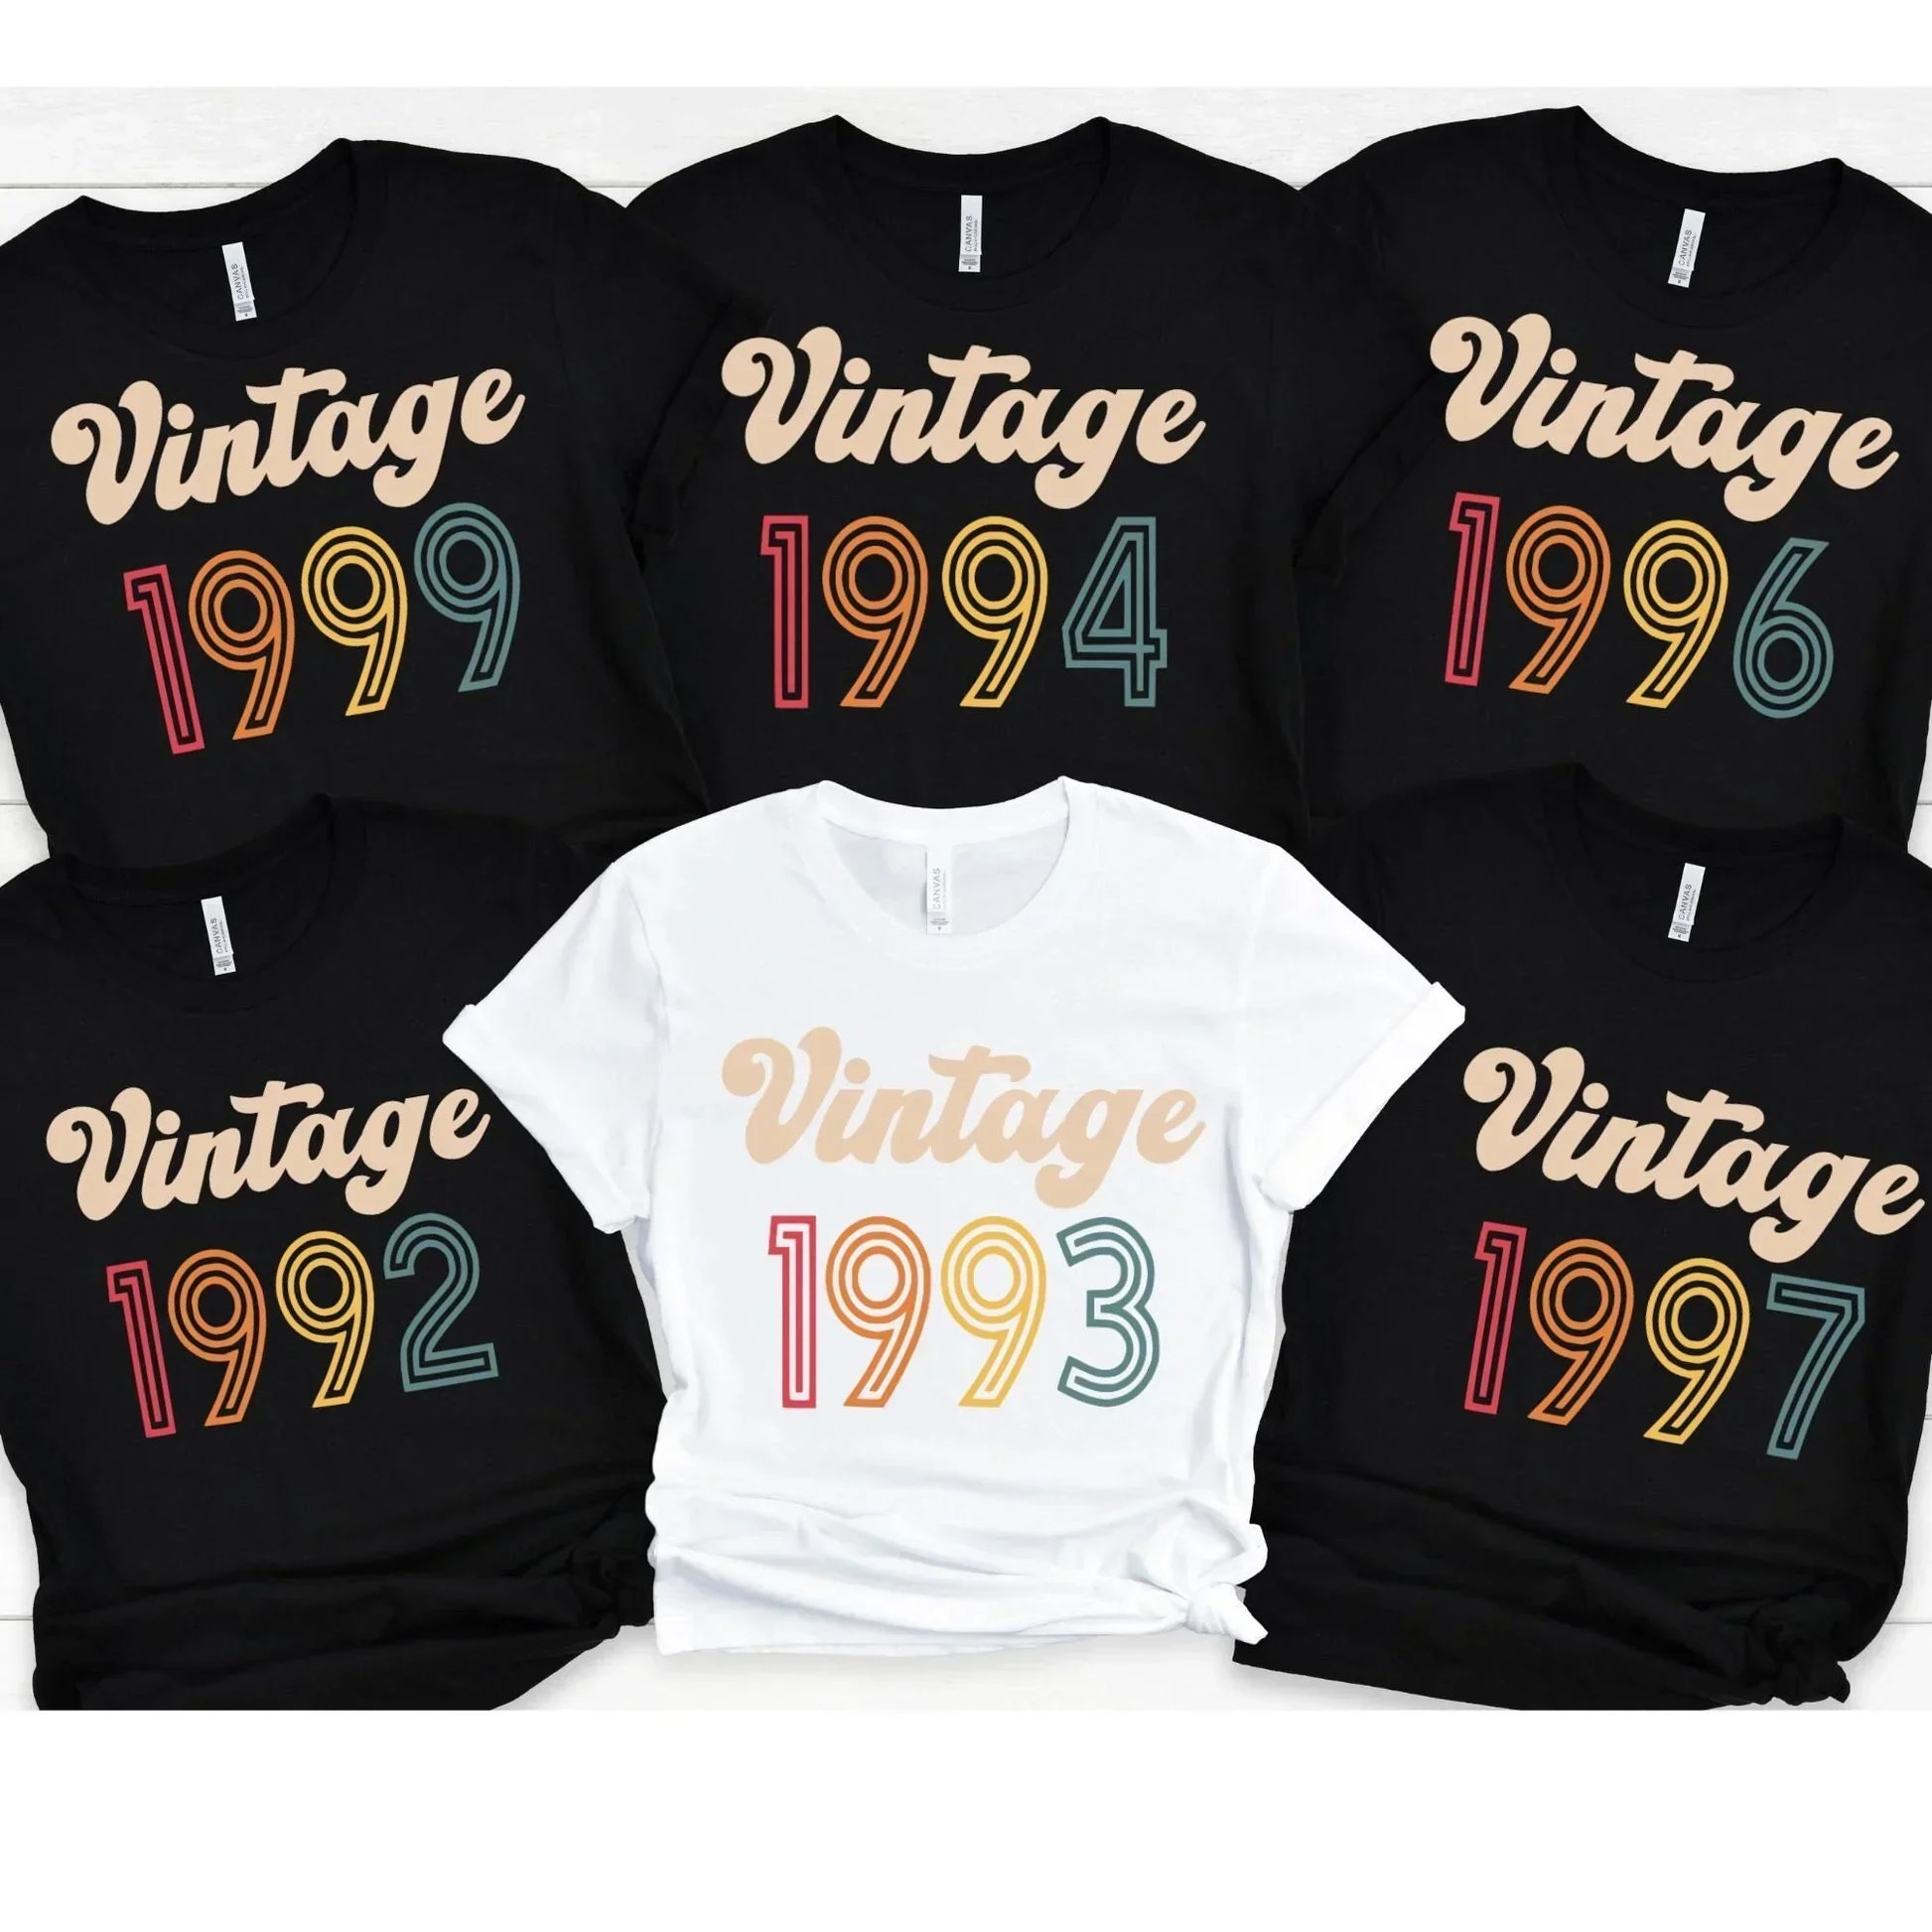 Vintage Birthday Shirts, Great for 90s babies, 30th Birthday T-shirt or 25th, 26th, 27th, 28th, 29th Birthday Gift for Party Celebration